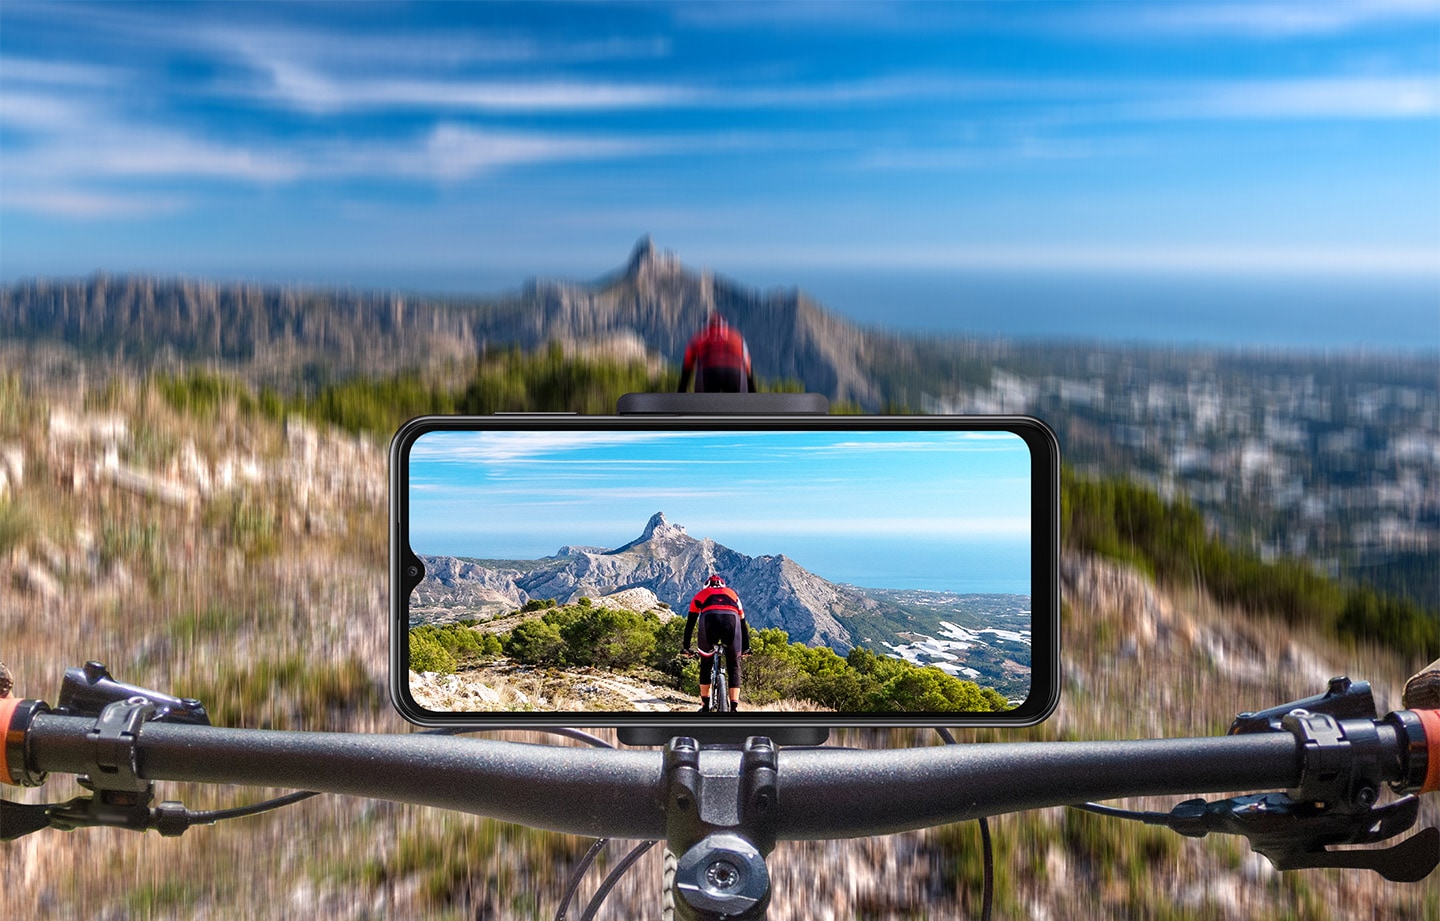 A Galaxy A23 is mounted in landscape mode on a bicycle handlebar. In front, a blurry, mountainous terrain is shown and on-screen, a clear picture of the terrain as well as the rider in front is captured.